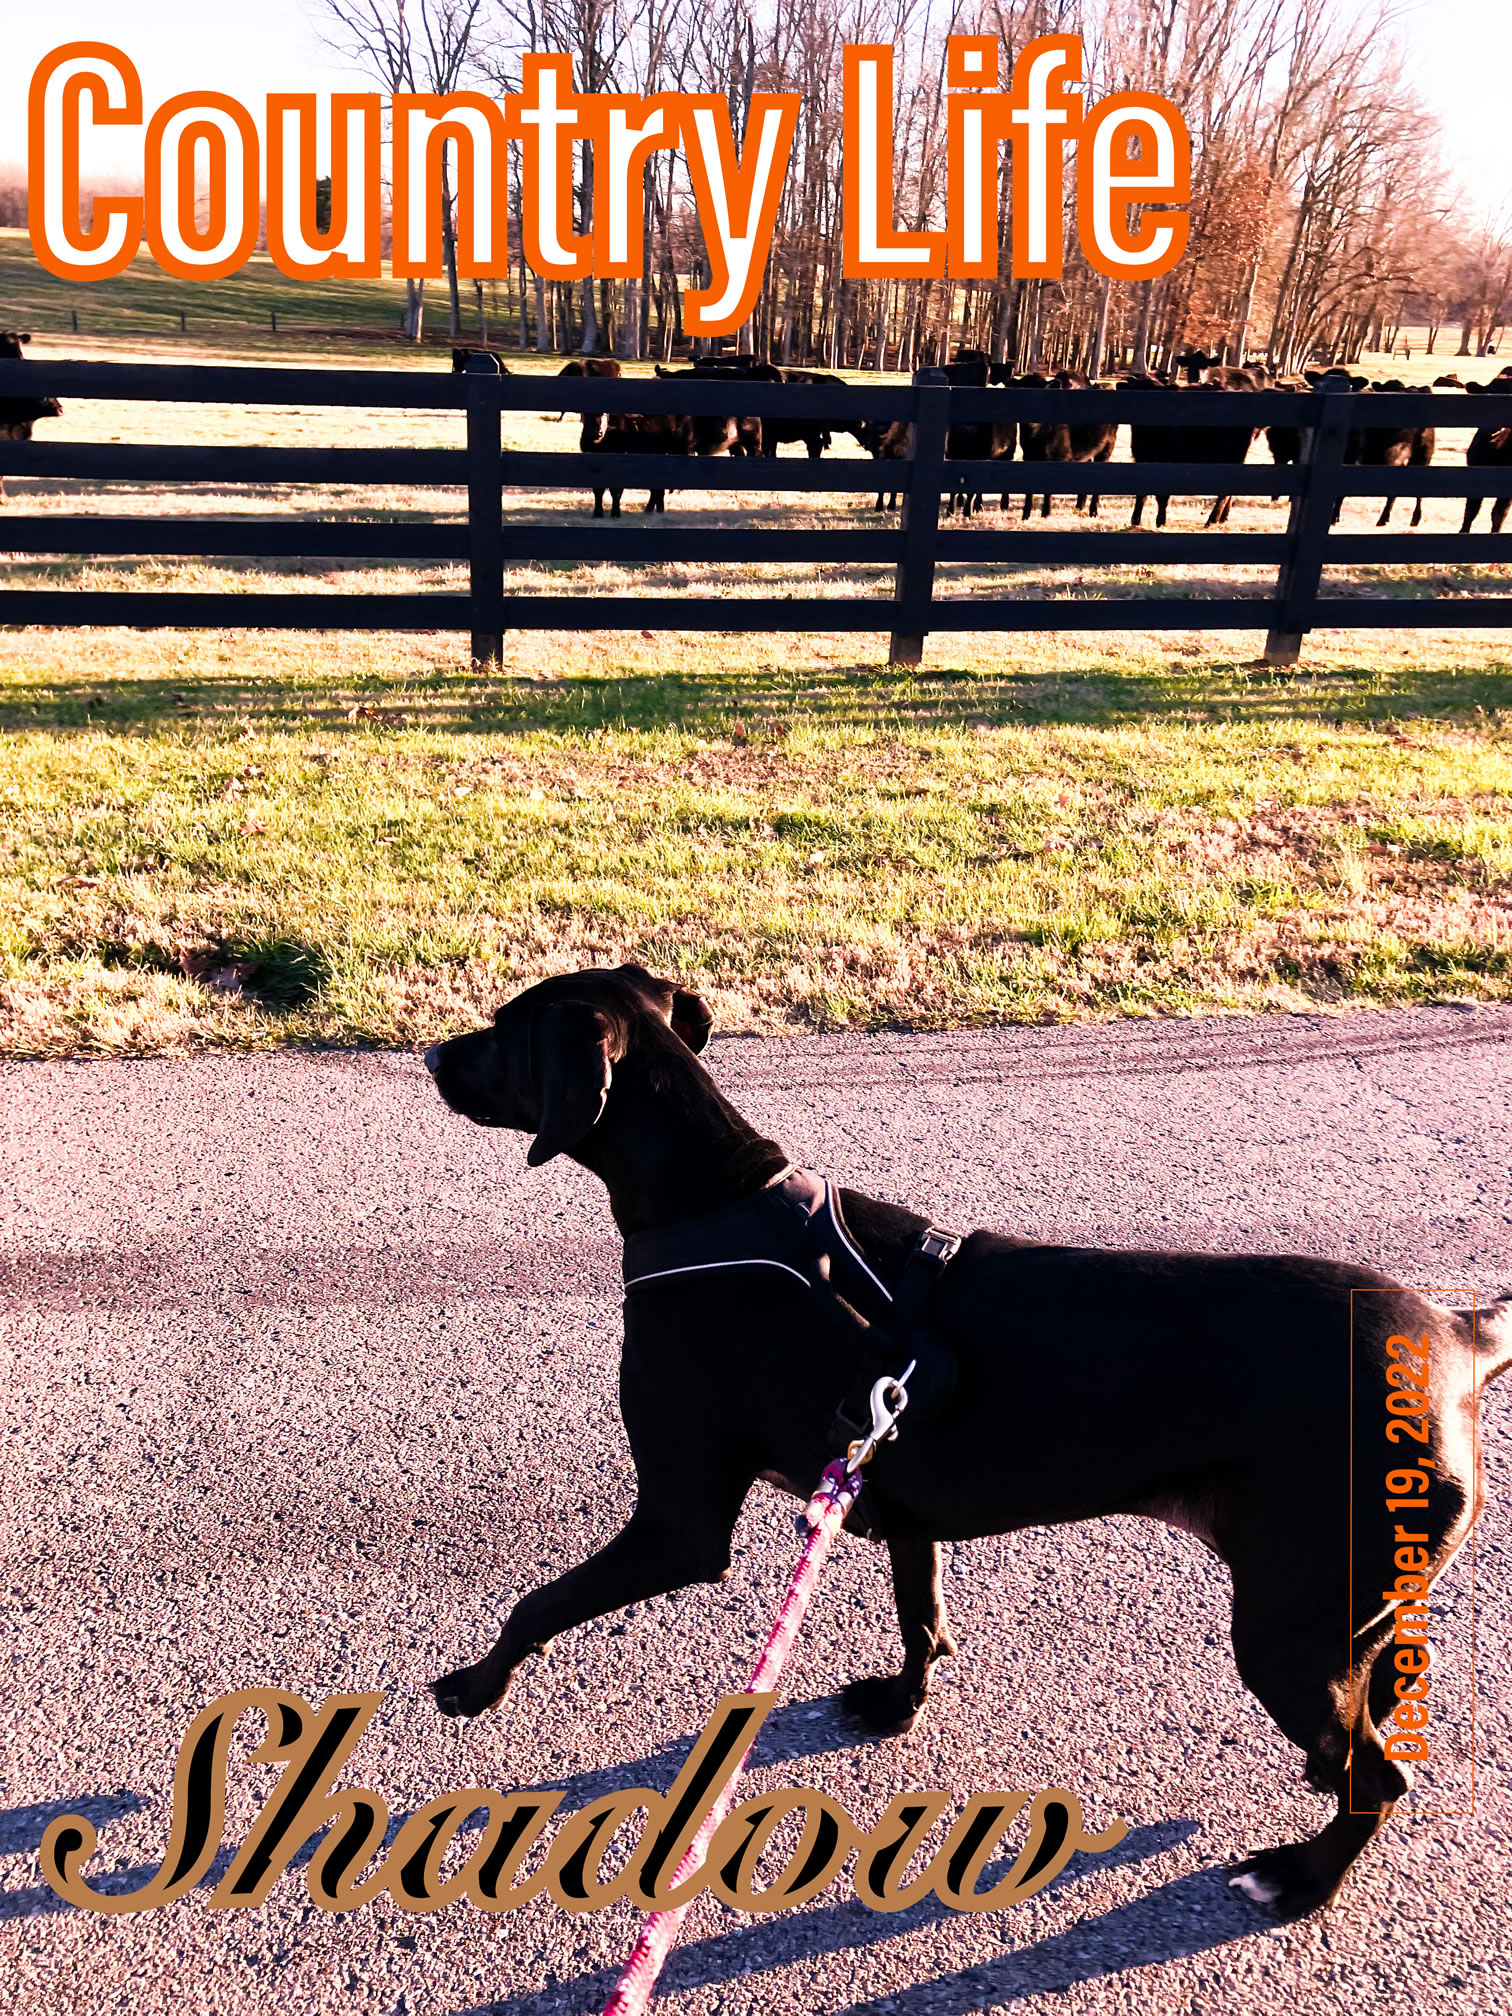 Docs Newest Reddit Community is Deep South about Country Life in the United States, here Puddin aka Shadow and Doc are on a walk